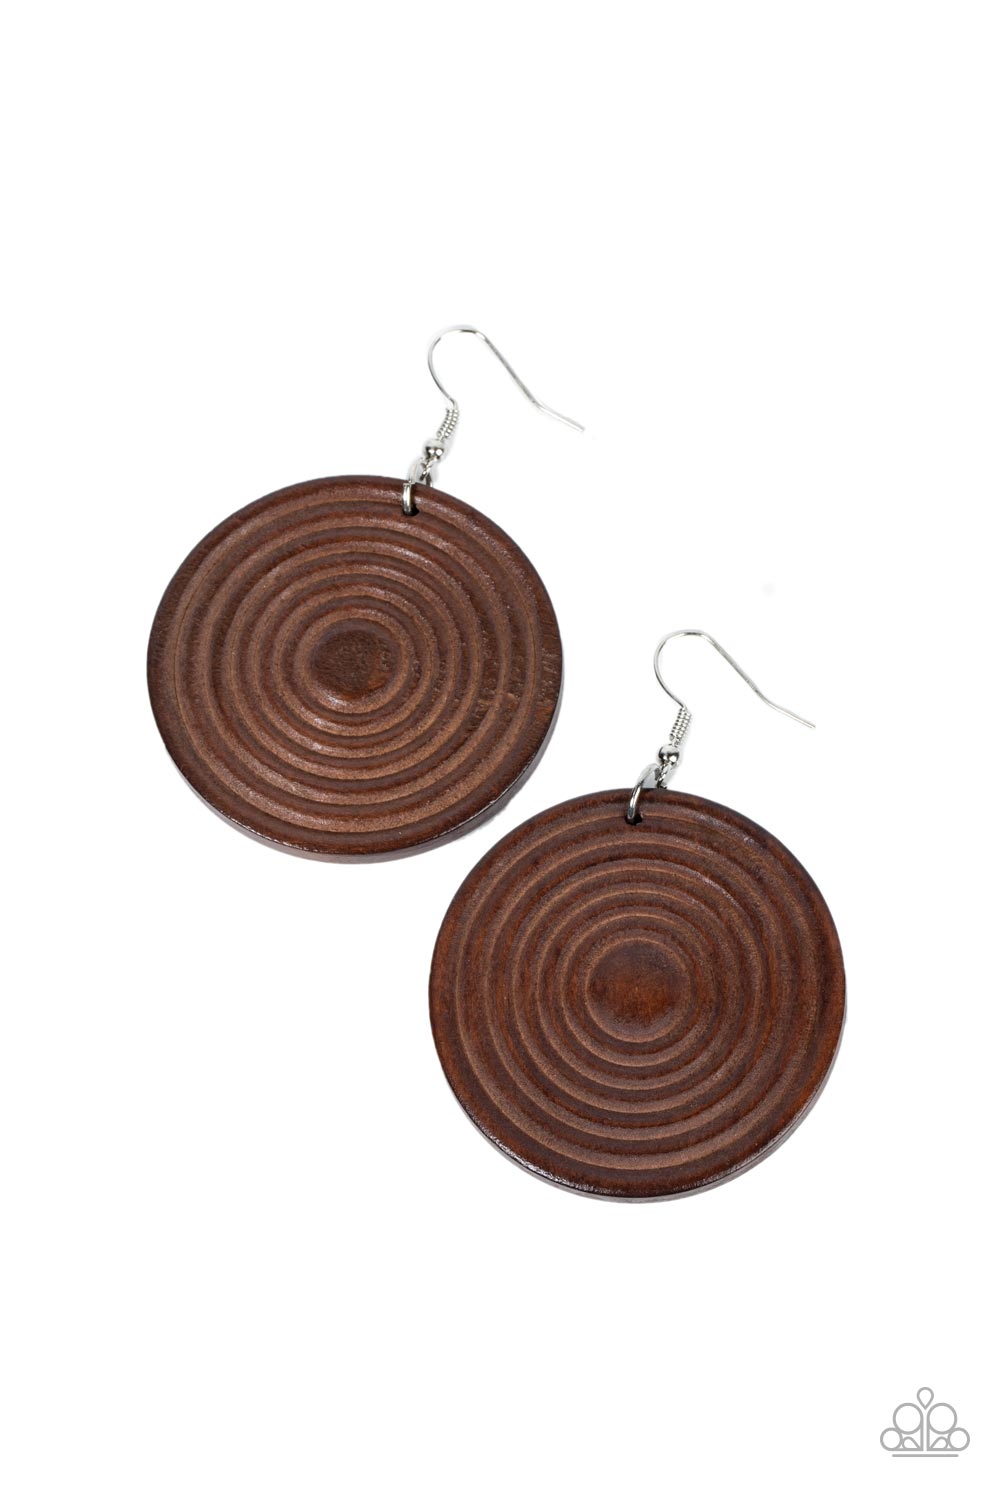 Caribbean Cymbal - Brown Wood Earrings - Paparazzi Accessories - A shiny brown wooden disc is engraved in circular details, resulting in a dizzying pop of color. Earring attaches to a standard fishhook earring. Sold as one pair of earrings.